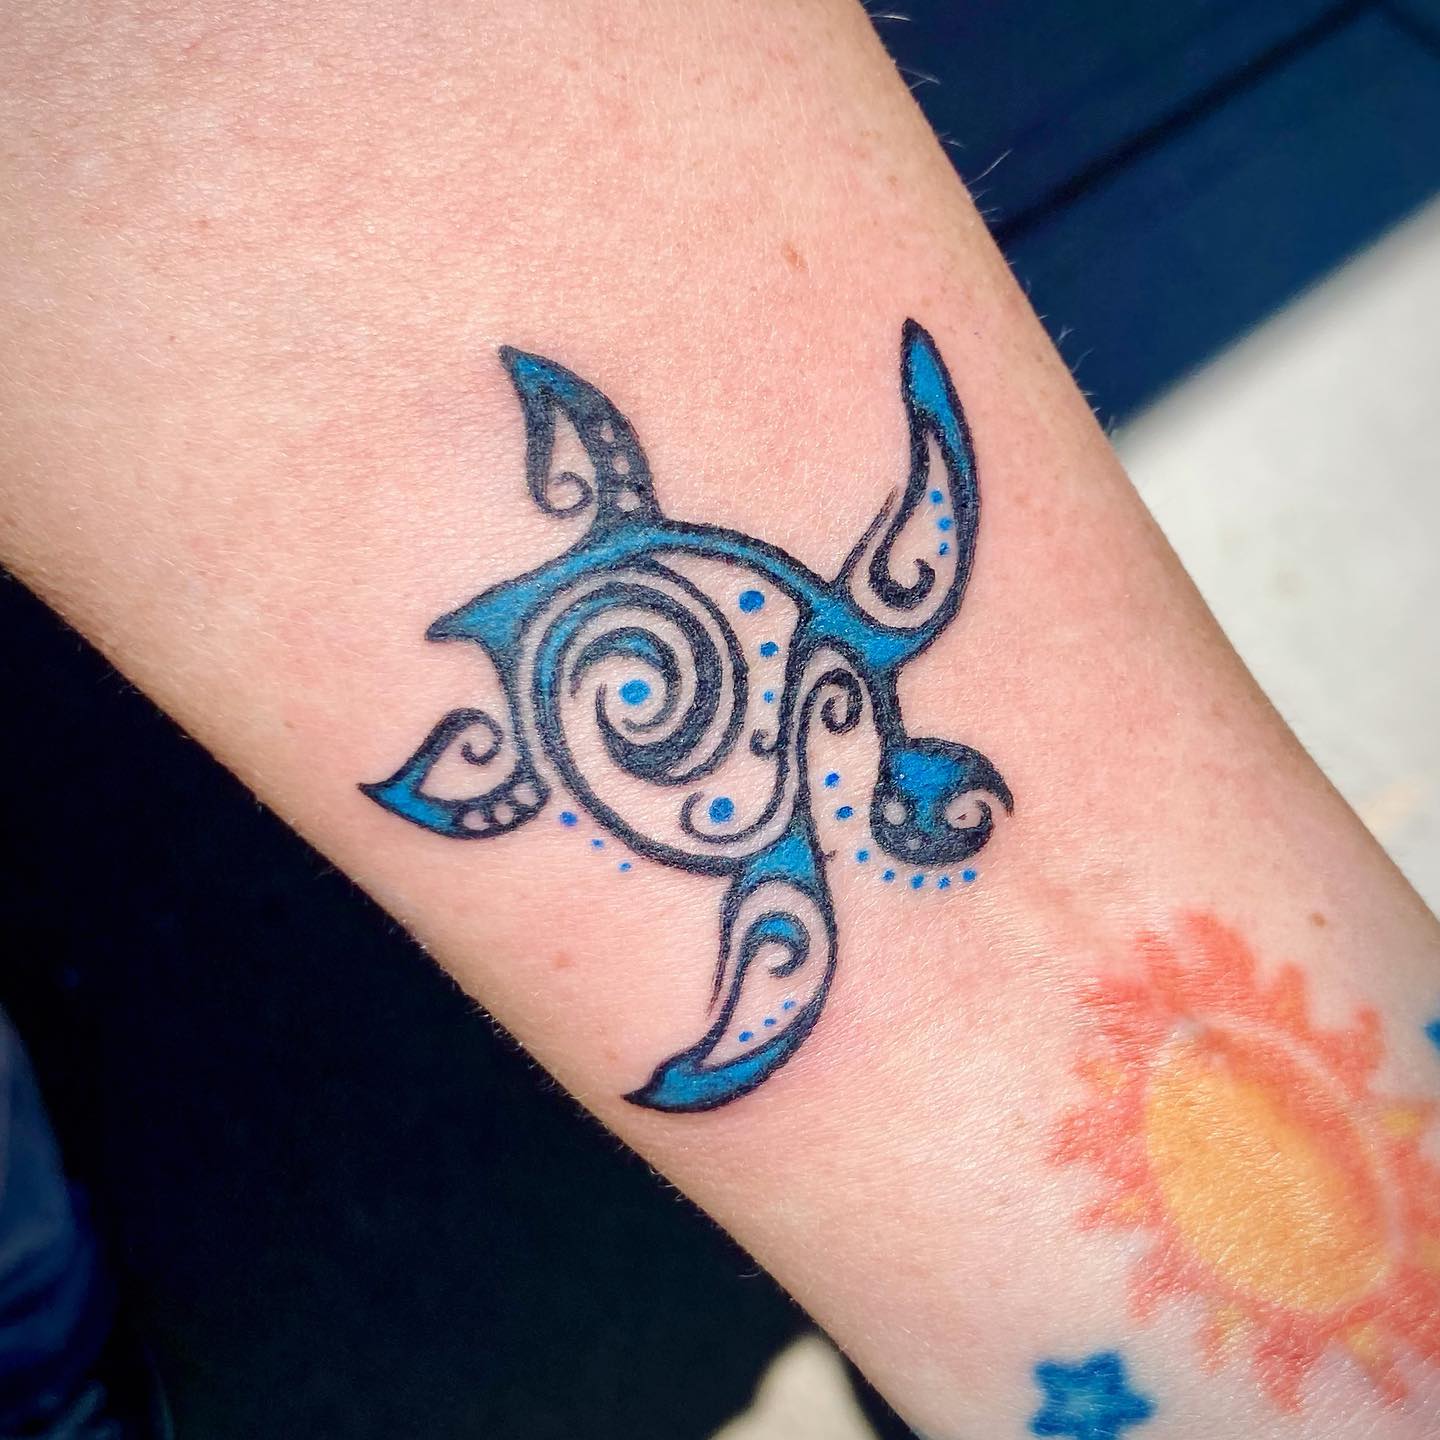 Can you spot the tribal elements that are incorporated into the sea turtle tattoo design? When combined with blue color, these elements create a look like waves in the water! Go and get it!